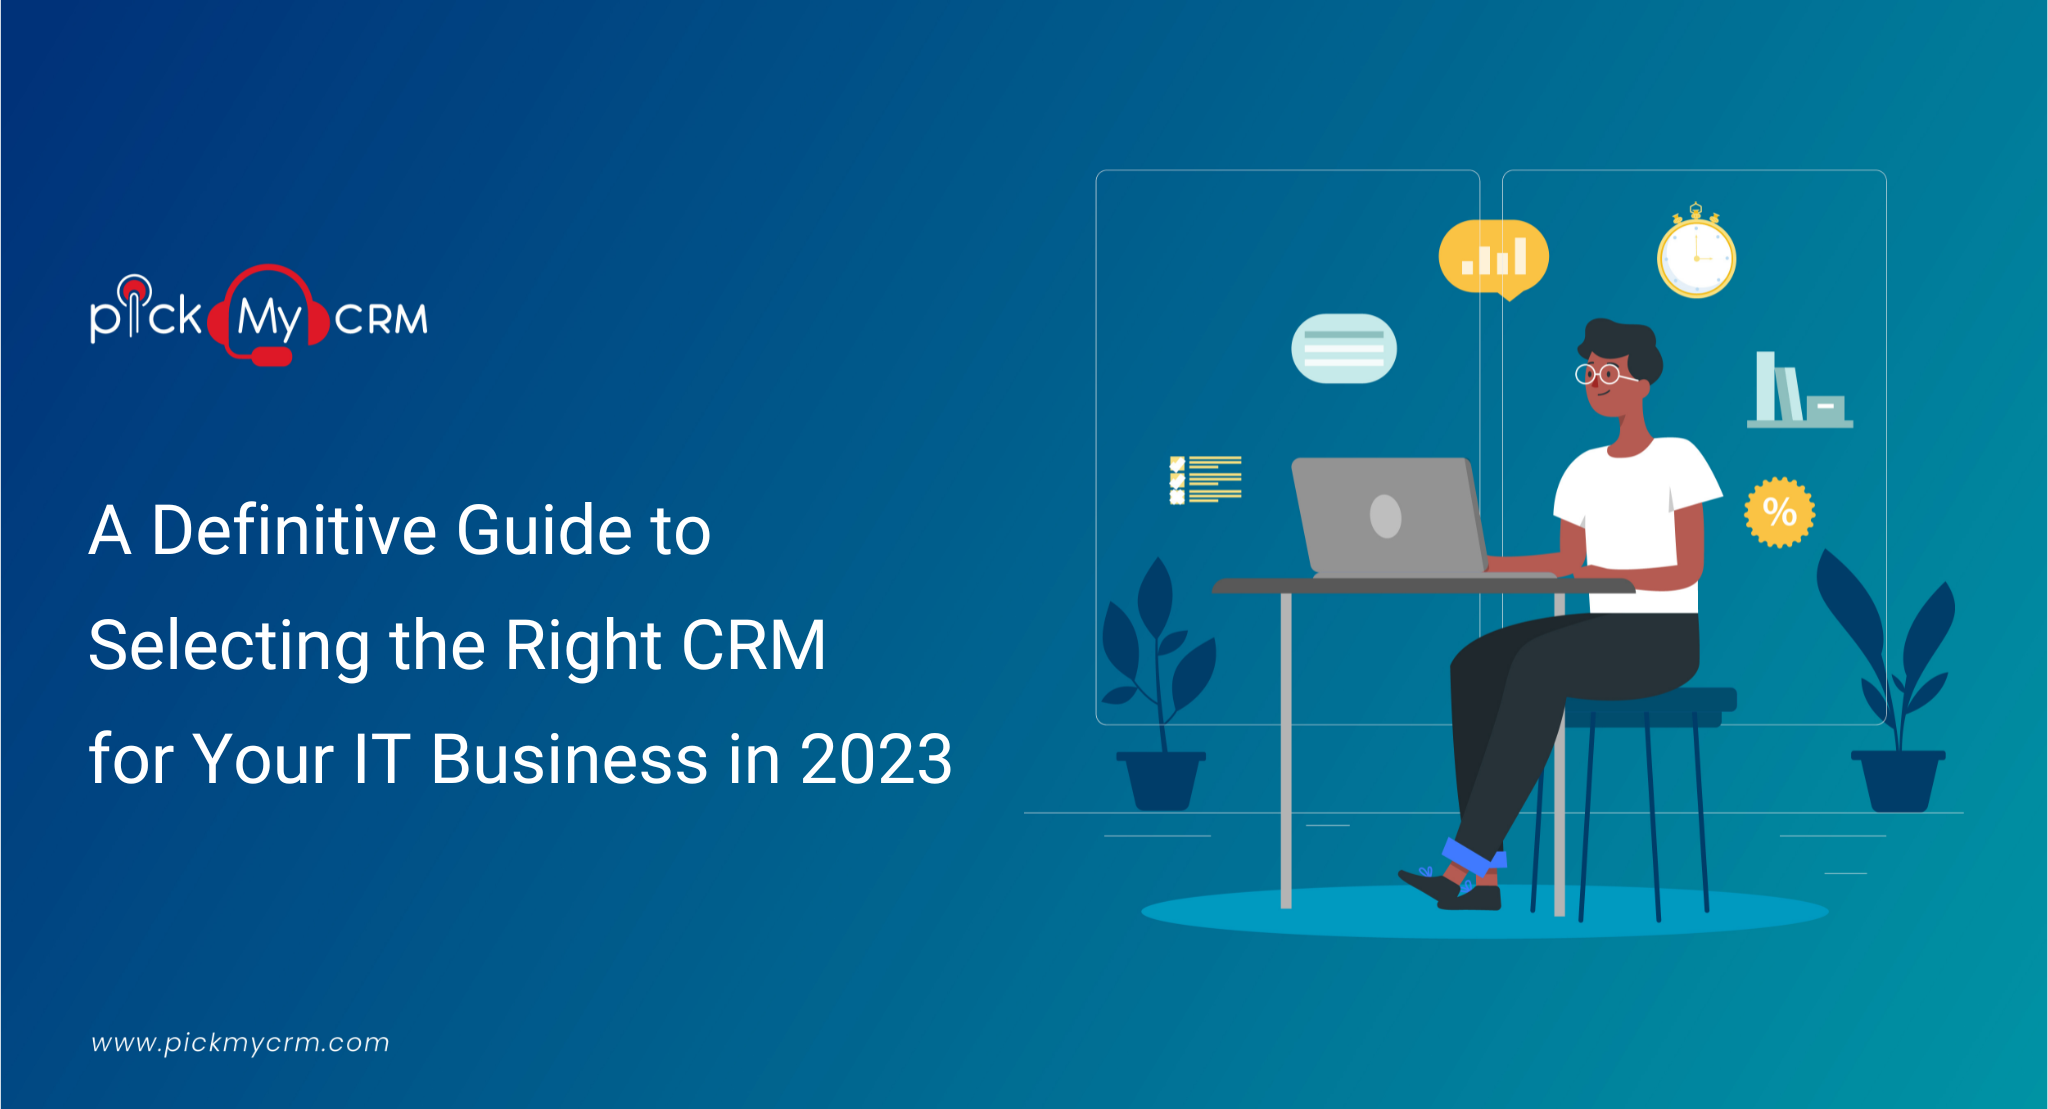 A Definitive Guide to Selecting the Right CRM for Your IT Business in 2023